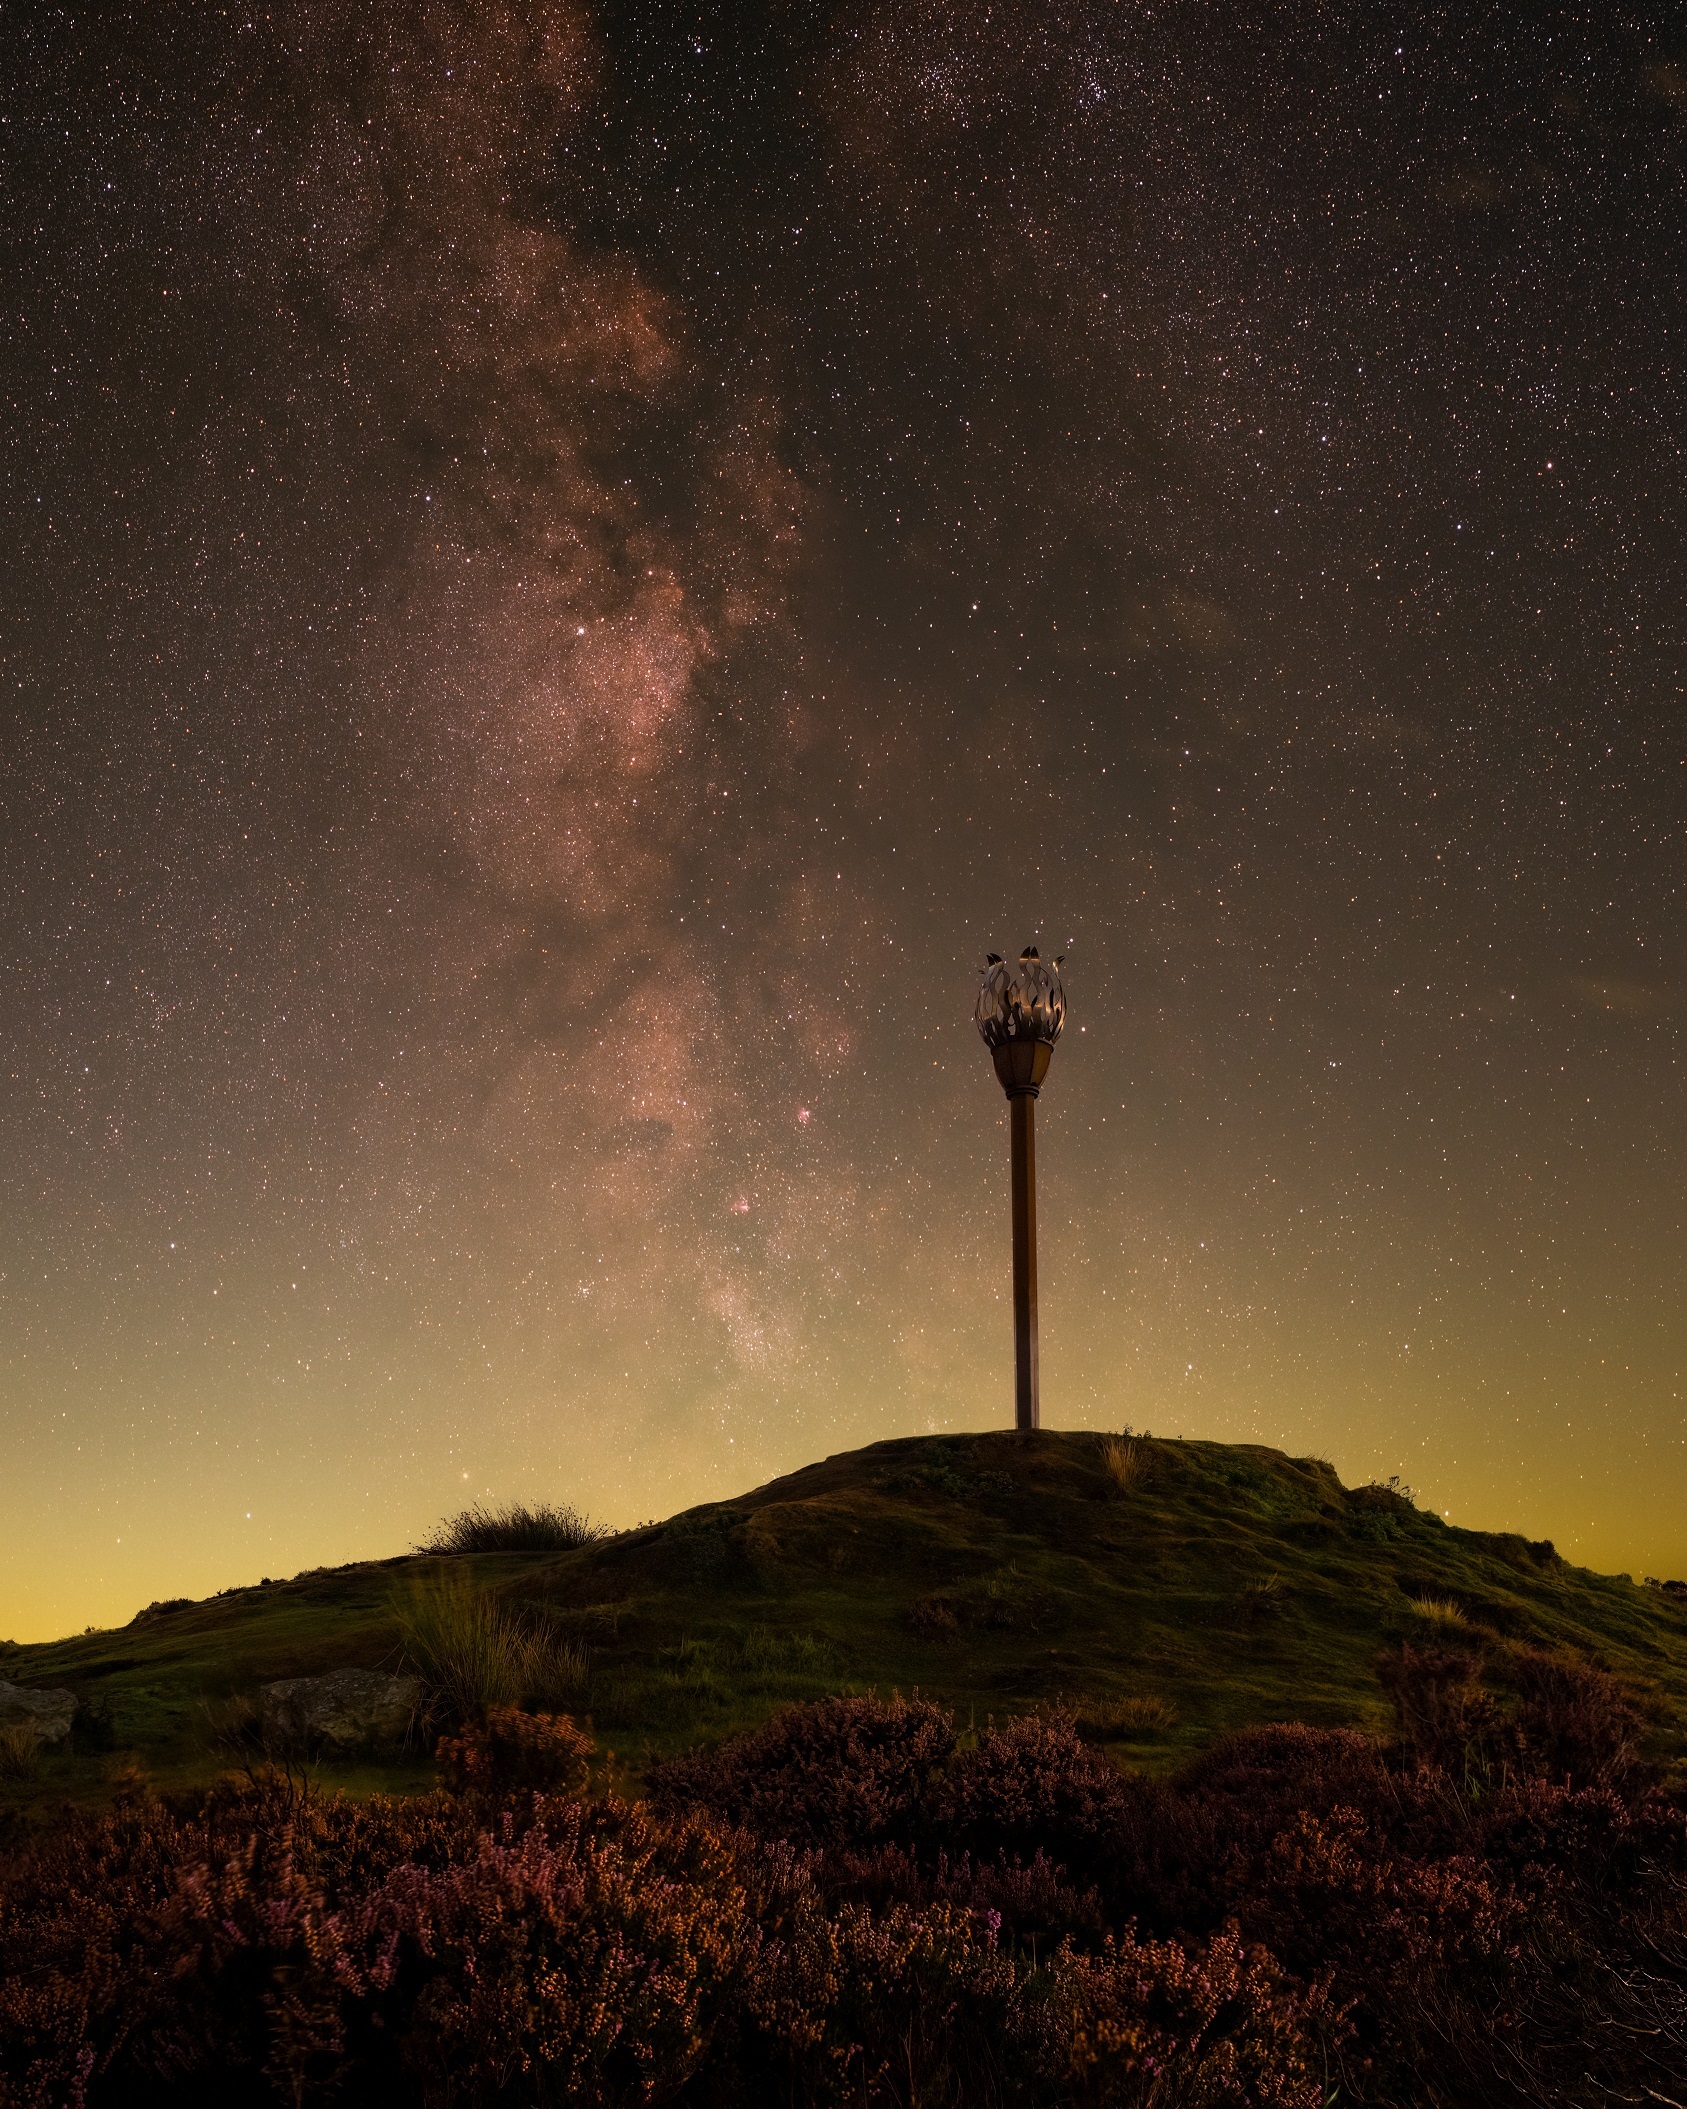 Danby Beacon, pictured by Tony Marsh